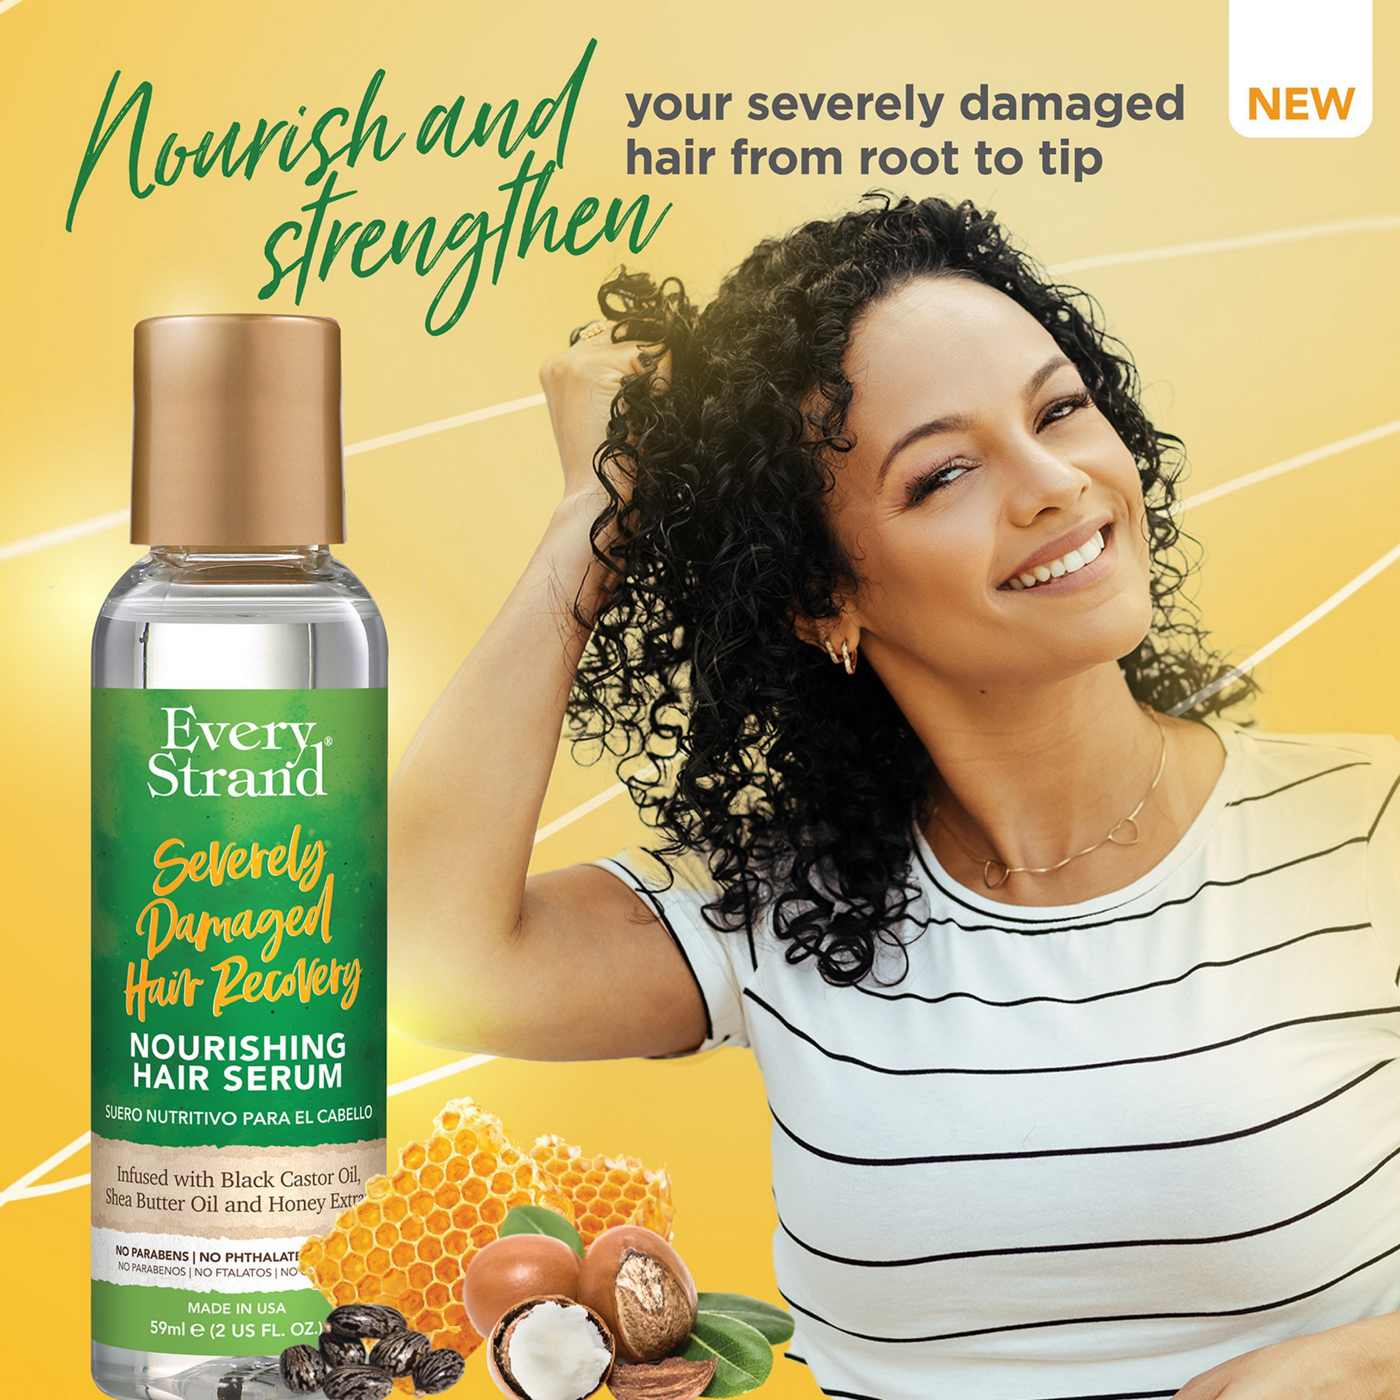 Every Strand Severely Damaged Hair Recovery Nourishing Hair Serum; image 5 of 5